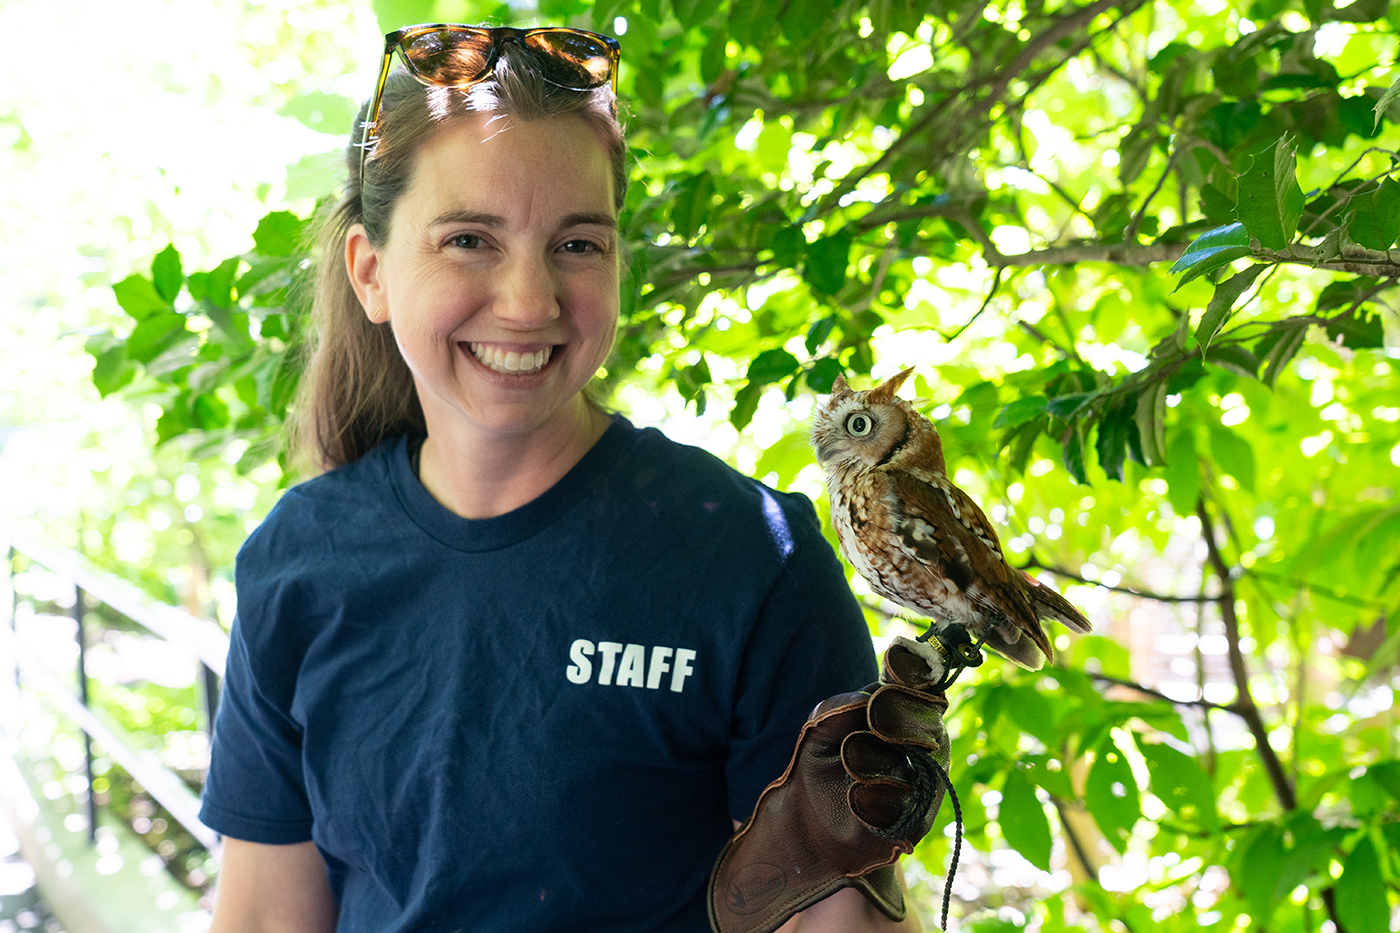 An American Trail keeper with a ponytail and a blue shirt poses with a tiny Eastern screech-owl.